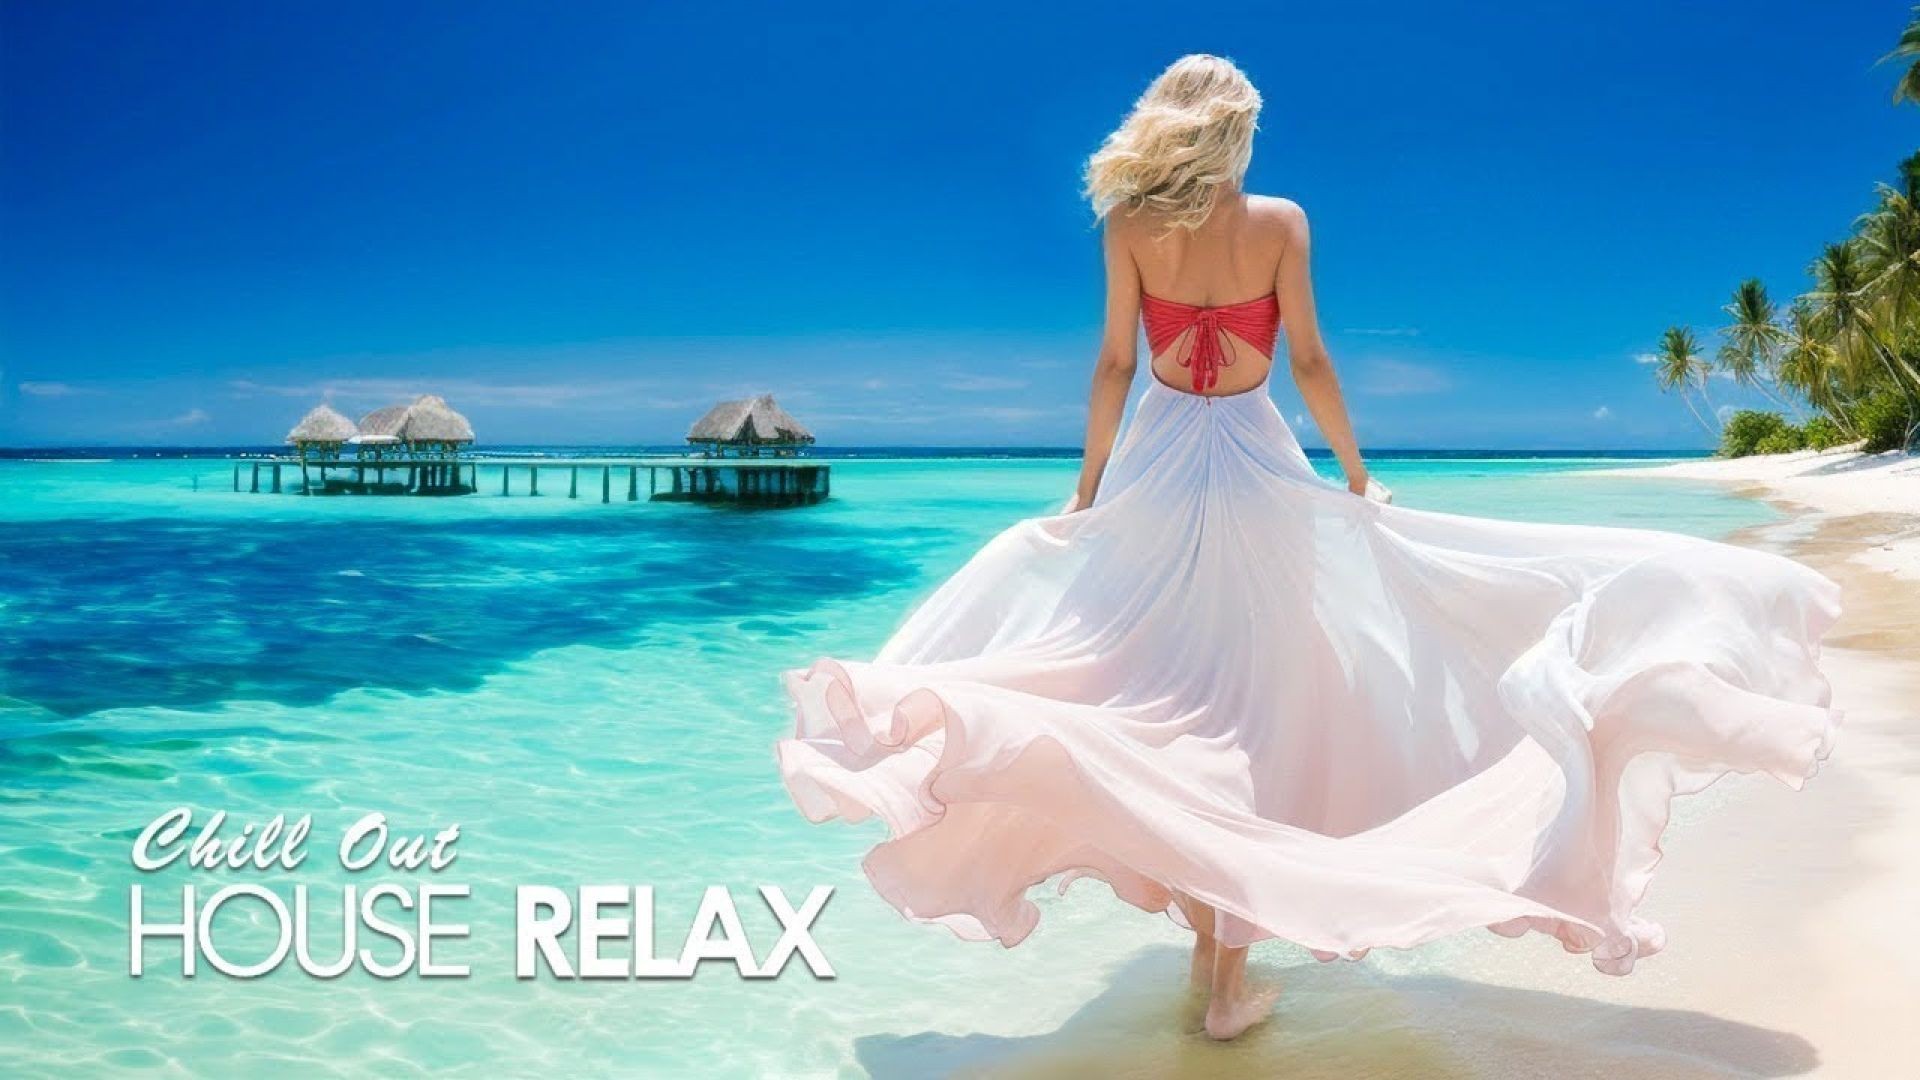 Ibiza Summer Mix 2024 🍓 Best Of Tropical Deep House Music Chill Out Mix 2024🍓 Chillout Lounge #36